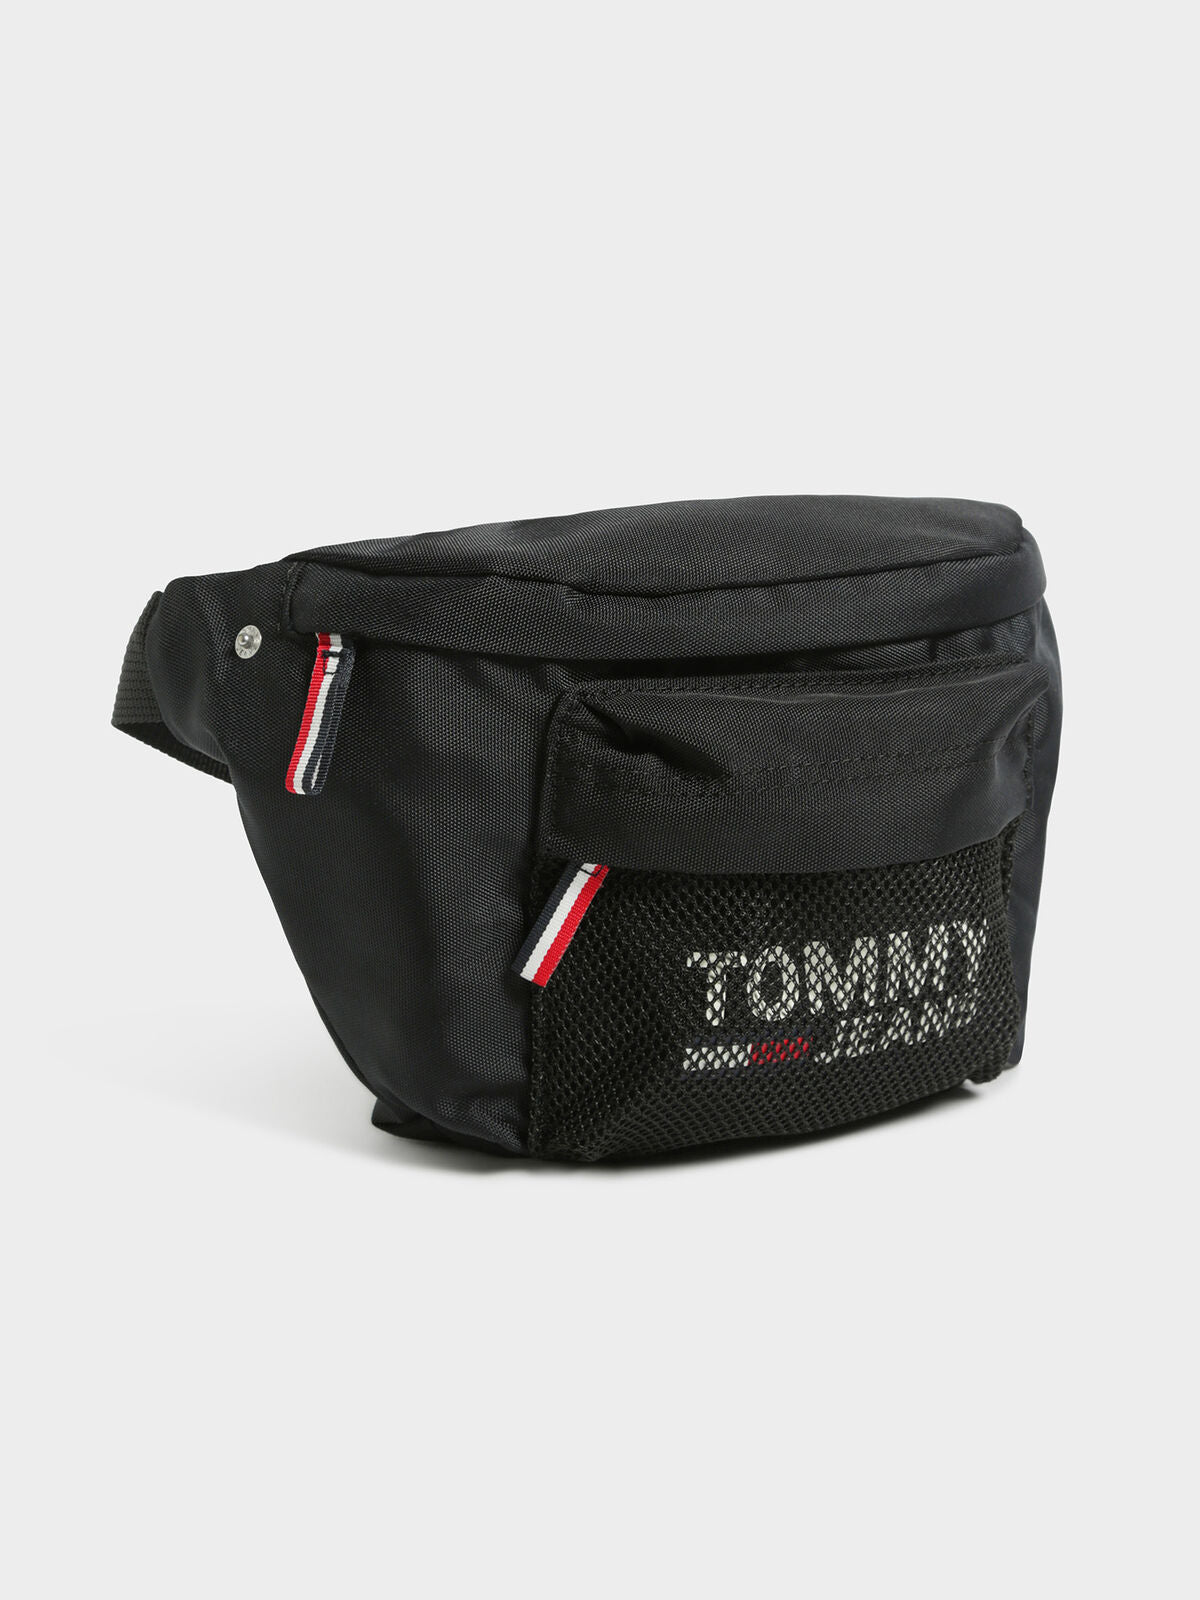 Cool City Bumbag in Black